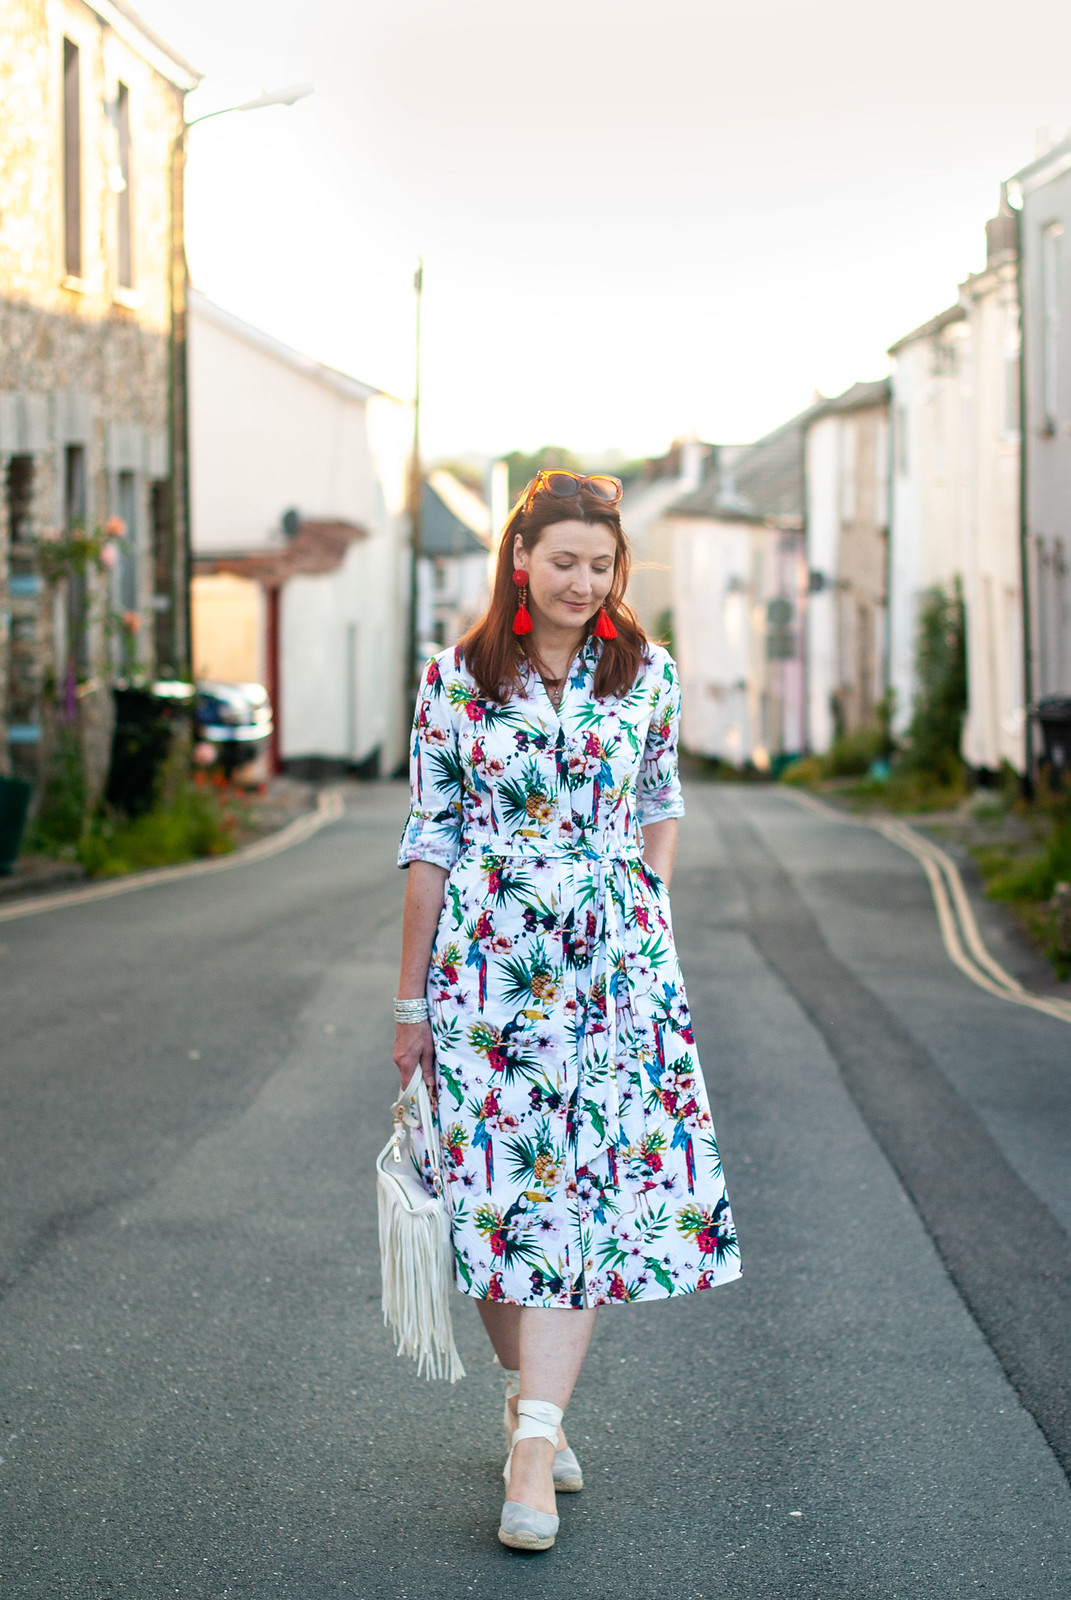 Florals With a Twist | A Loud Birds & Tropical Print \ tropical print midi shirt dress \ grey lace-up espadrilles \ red tassel earrings \ white fringed crossbody bag | Not Dressed As Lamb, over 40 style